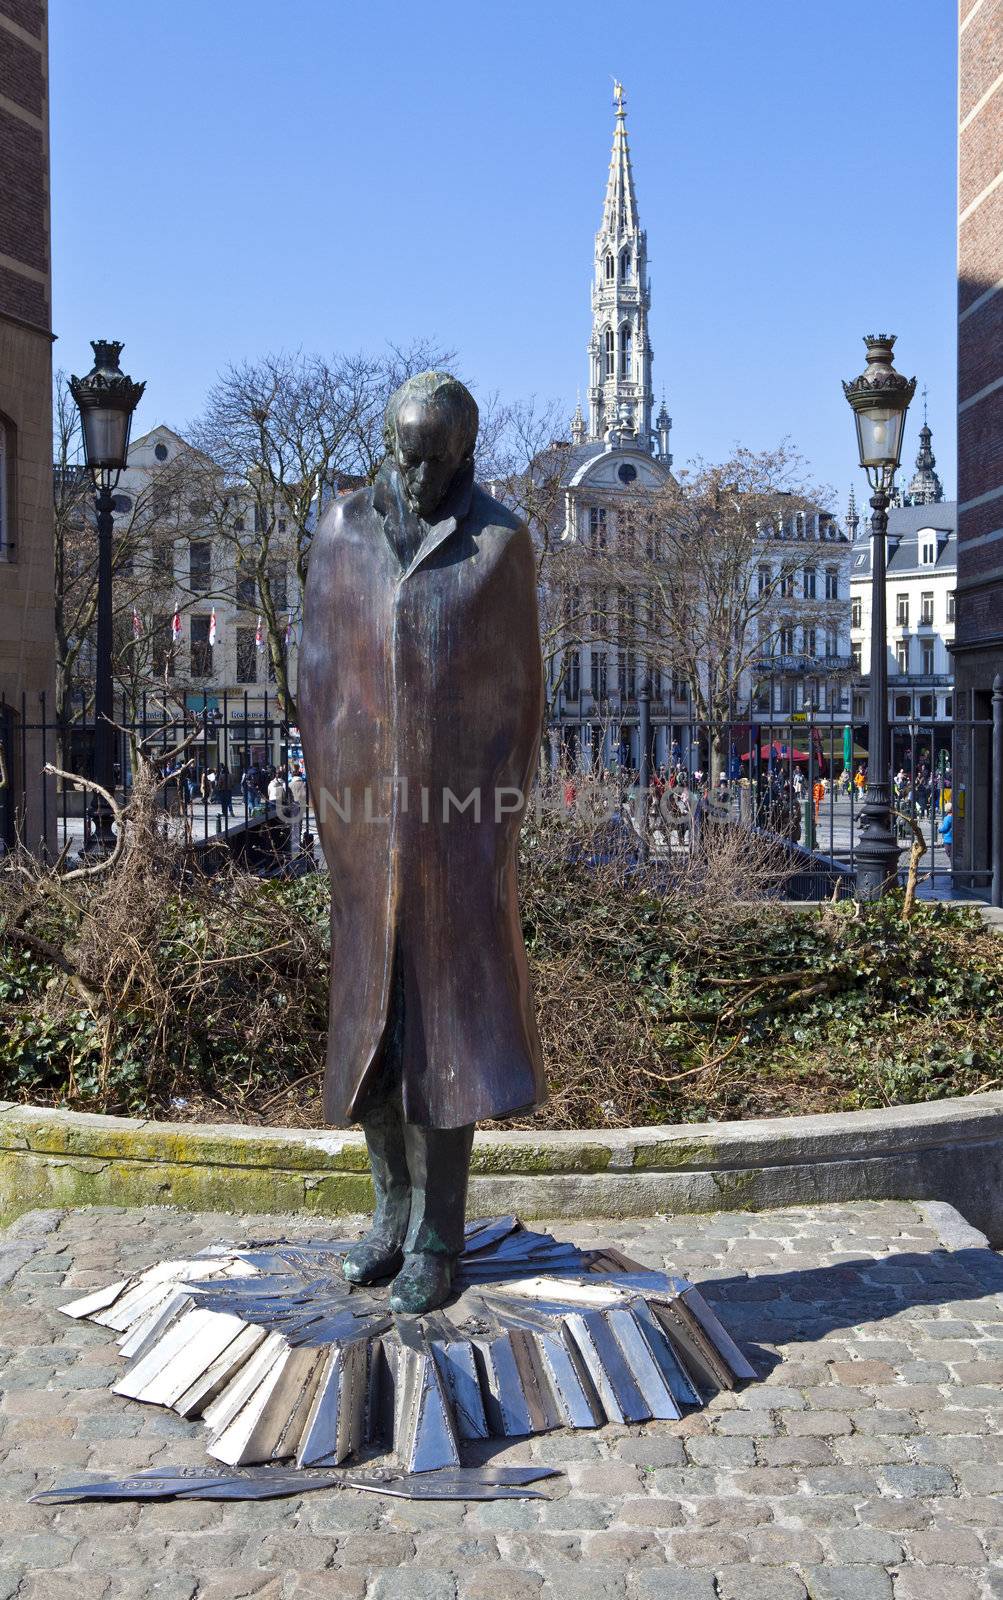 A statue of Hungarian composer and pianist Bela Bartok located in the centre of Brussels, Belgium.